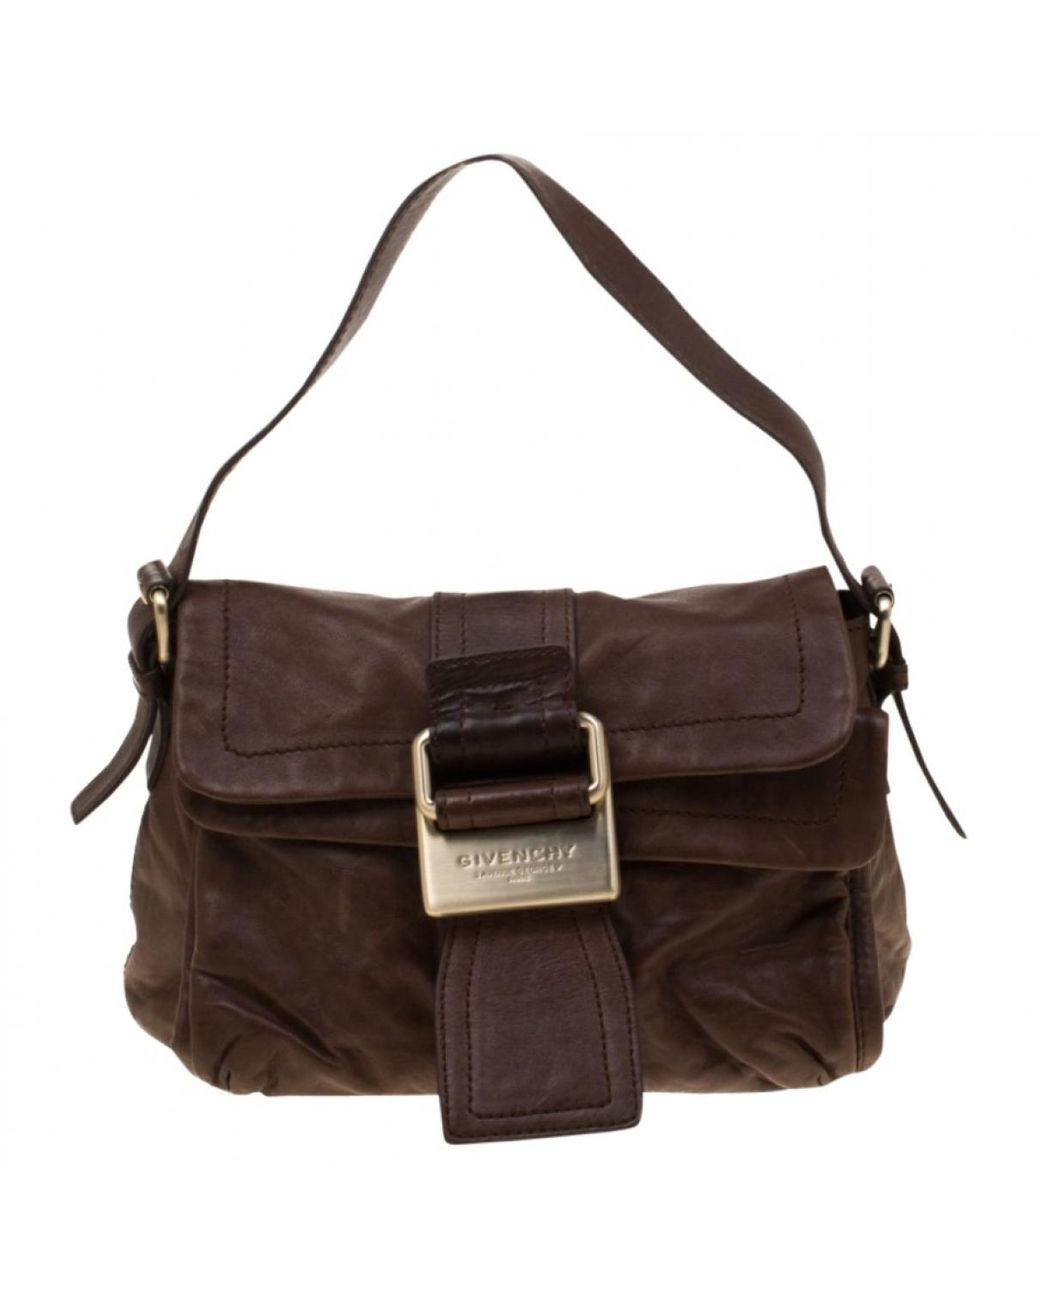 Givenchy Brown Leather Handbag in Brown - Lyst